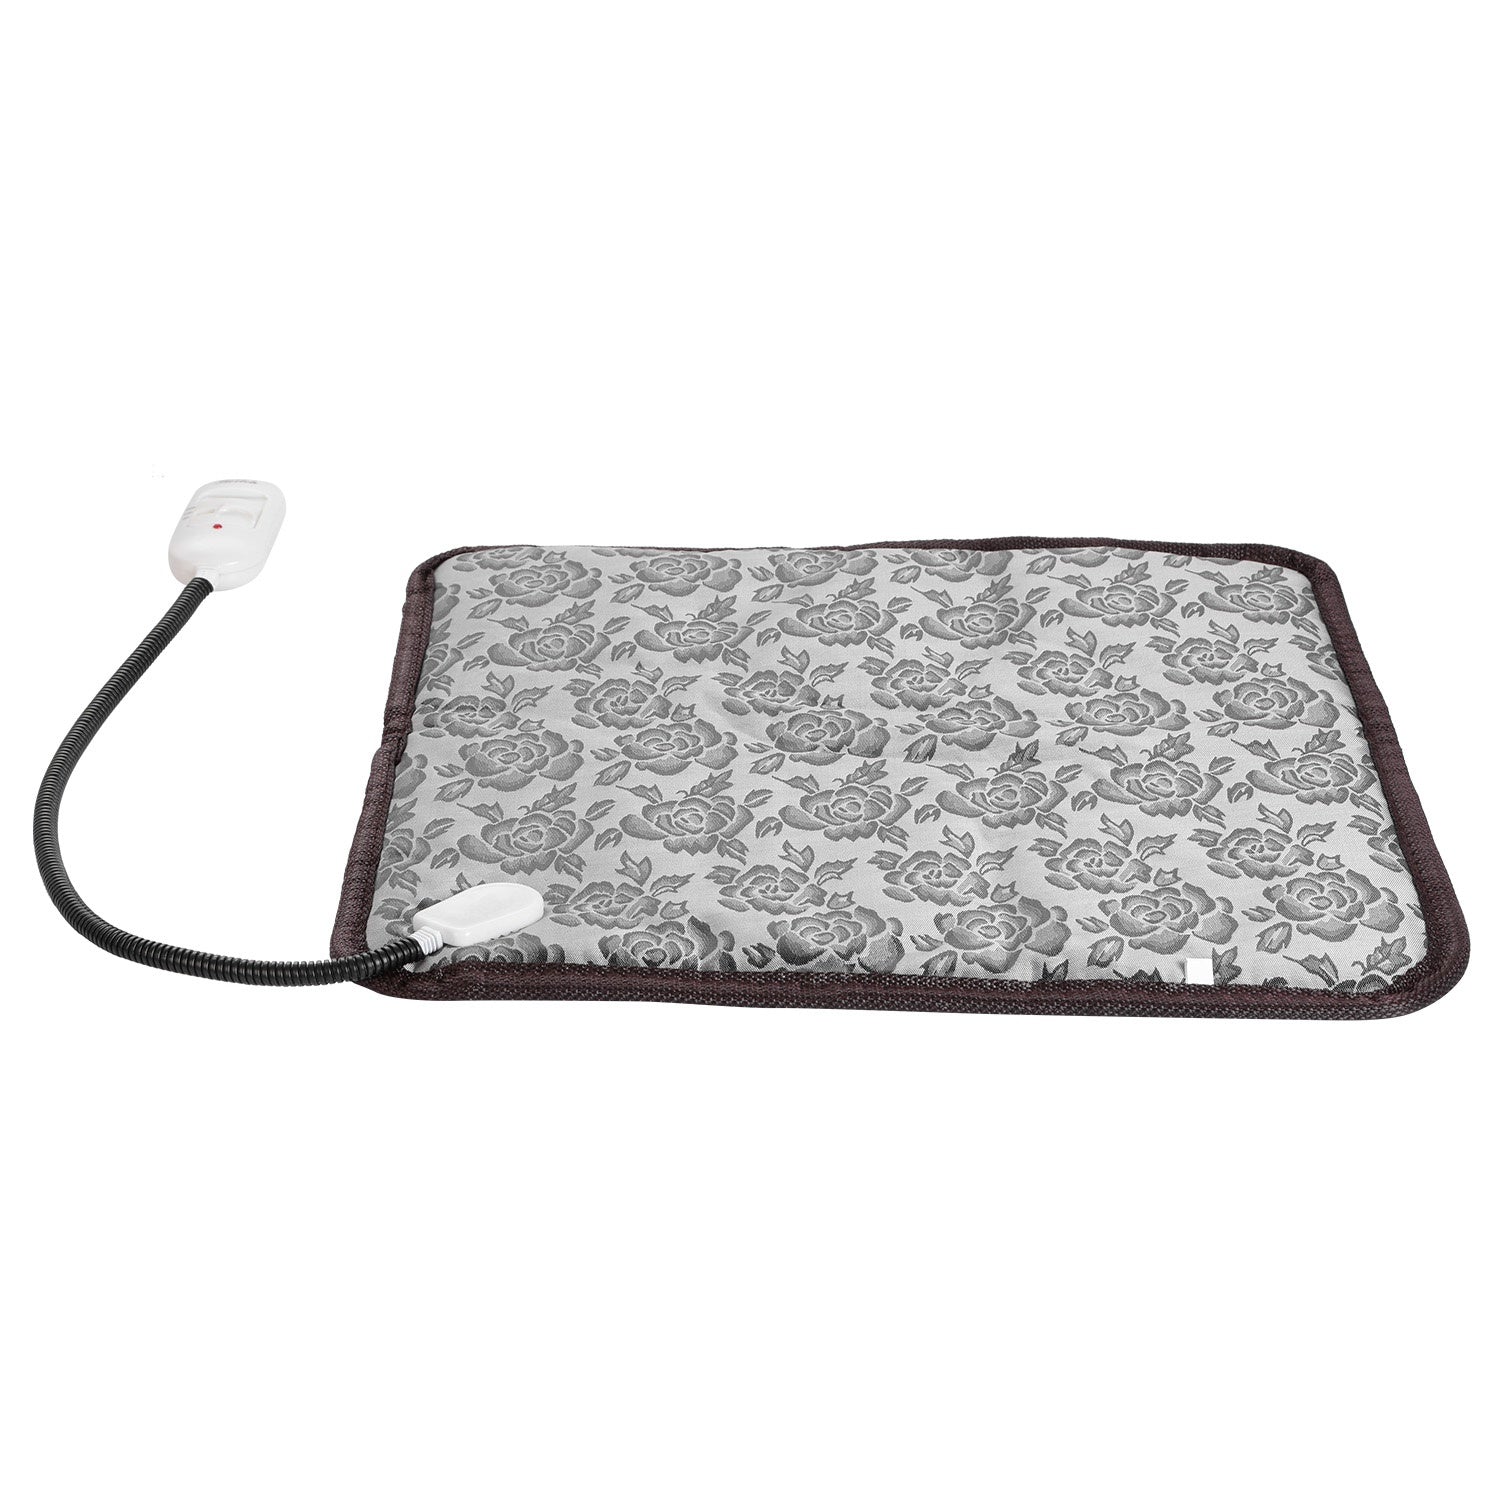 title:Pet Heating Pad Dog Cat Electric Heating Mat Waterproof Adjustable Warming Blanket with Chew Resistant Steel Cord Case;color:not applicable